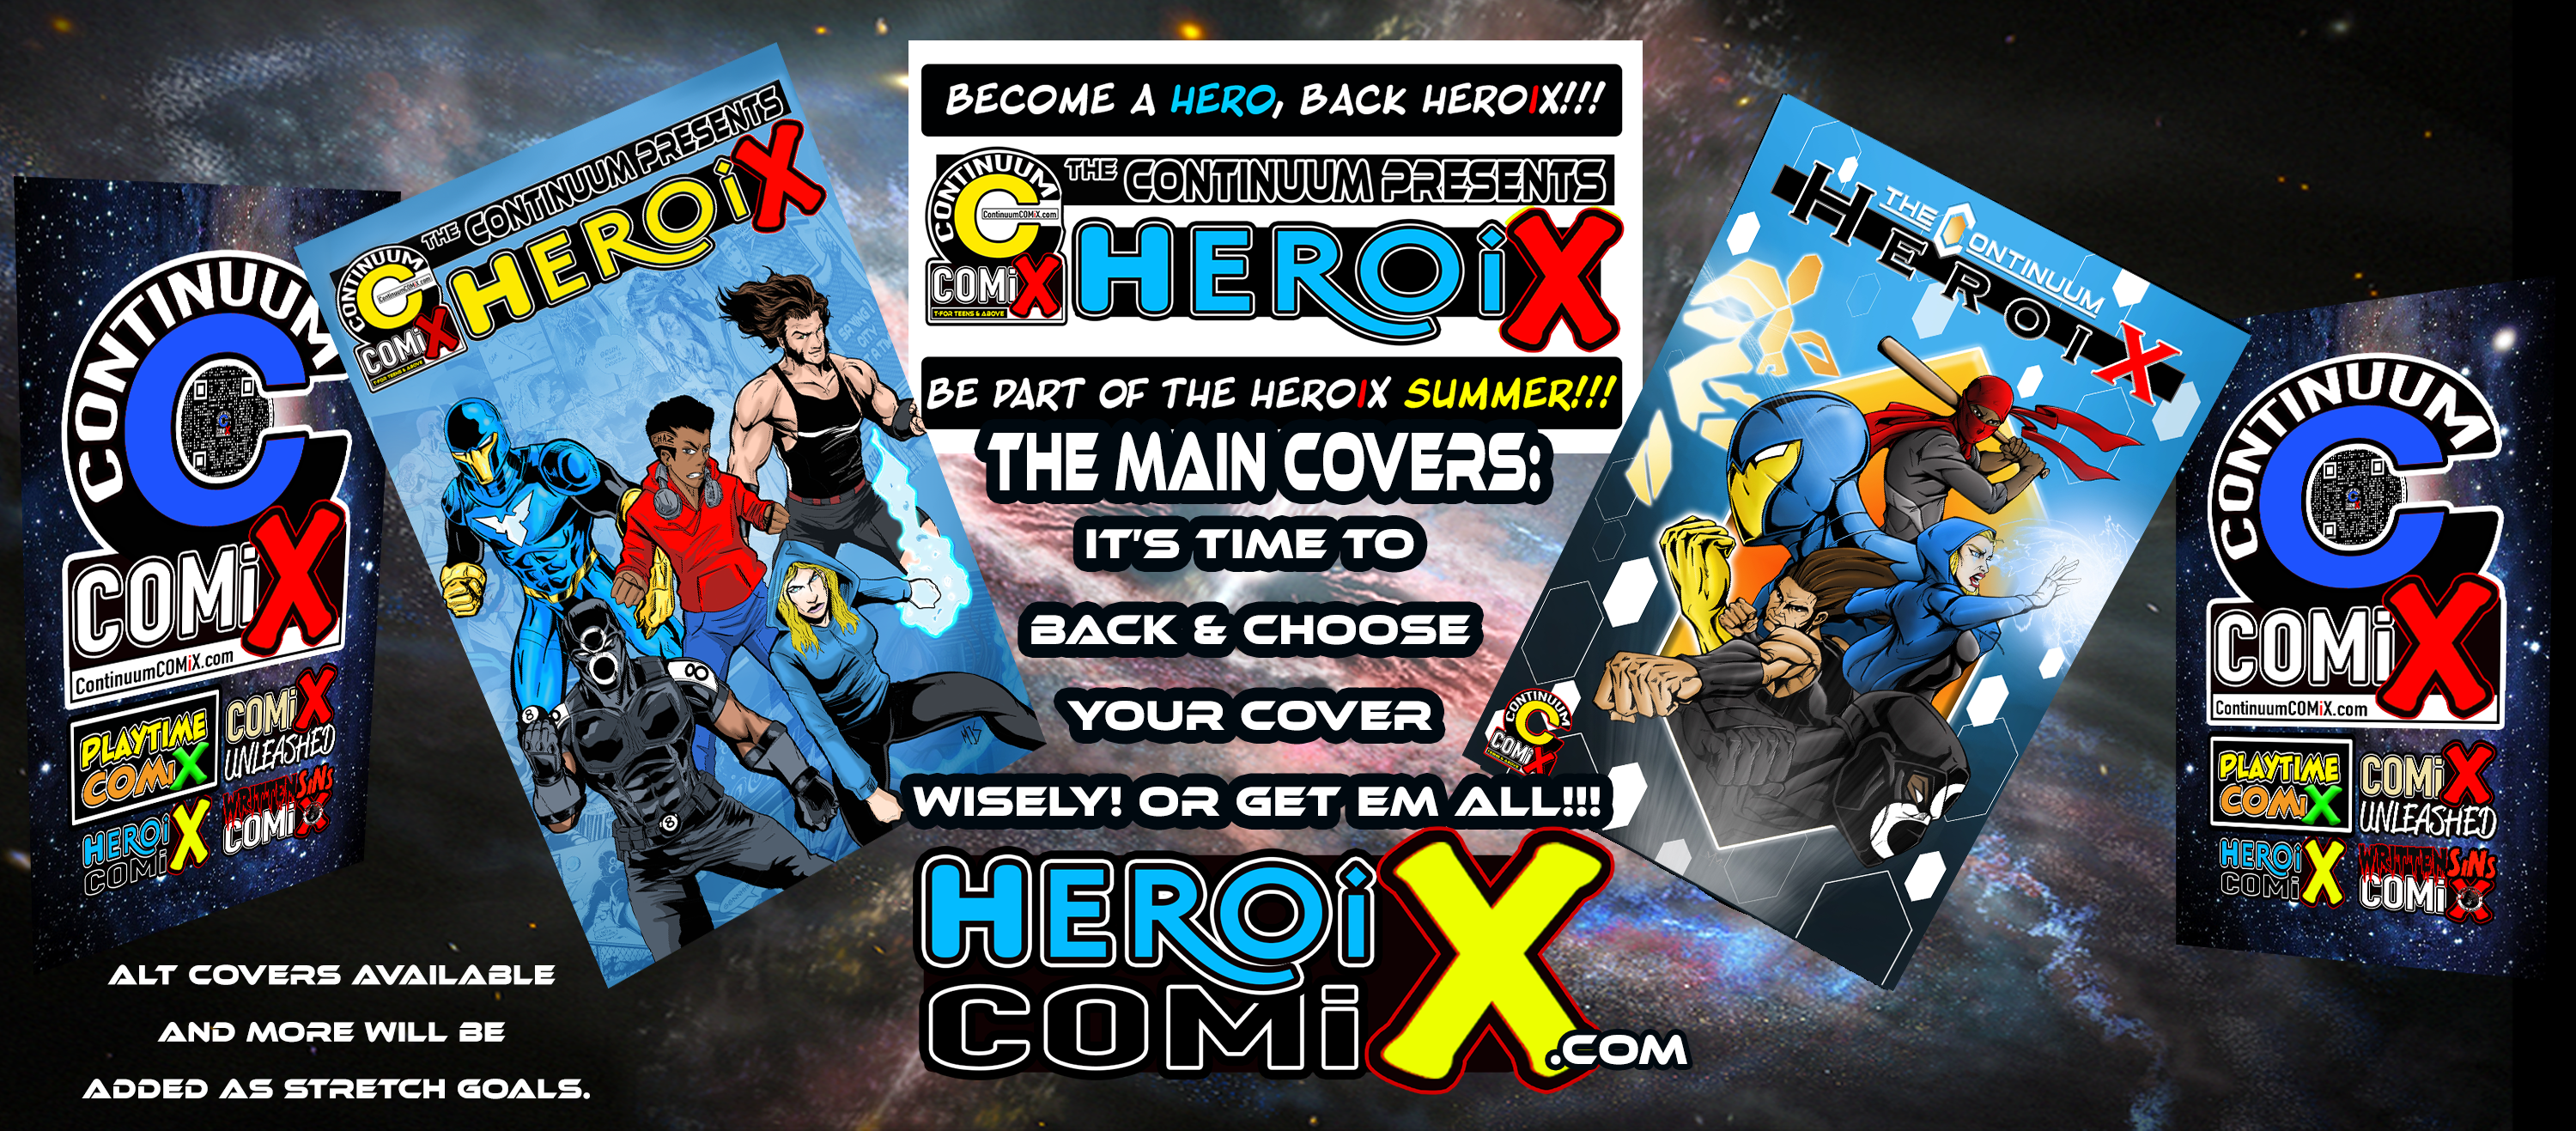 THE CONTINUUM PRESENTS: HEROIX A look into Modern Day Heroism from the View Point of Creators. What do modern Day heroes look/sound & act like? Find out in HEROIX!